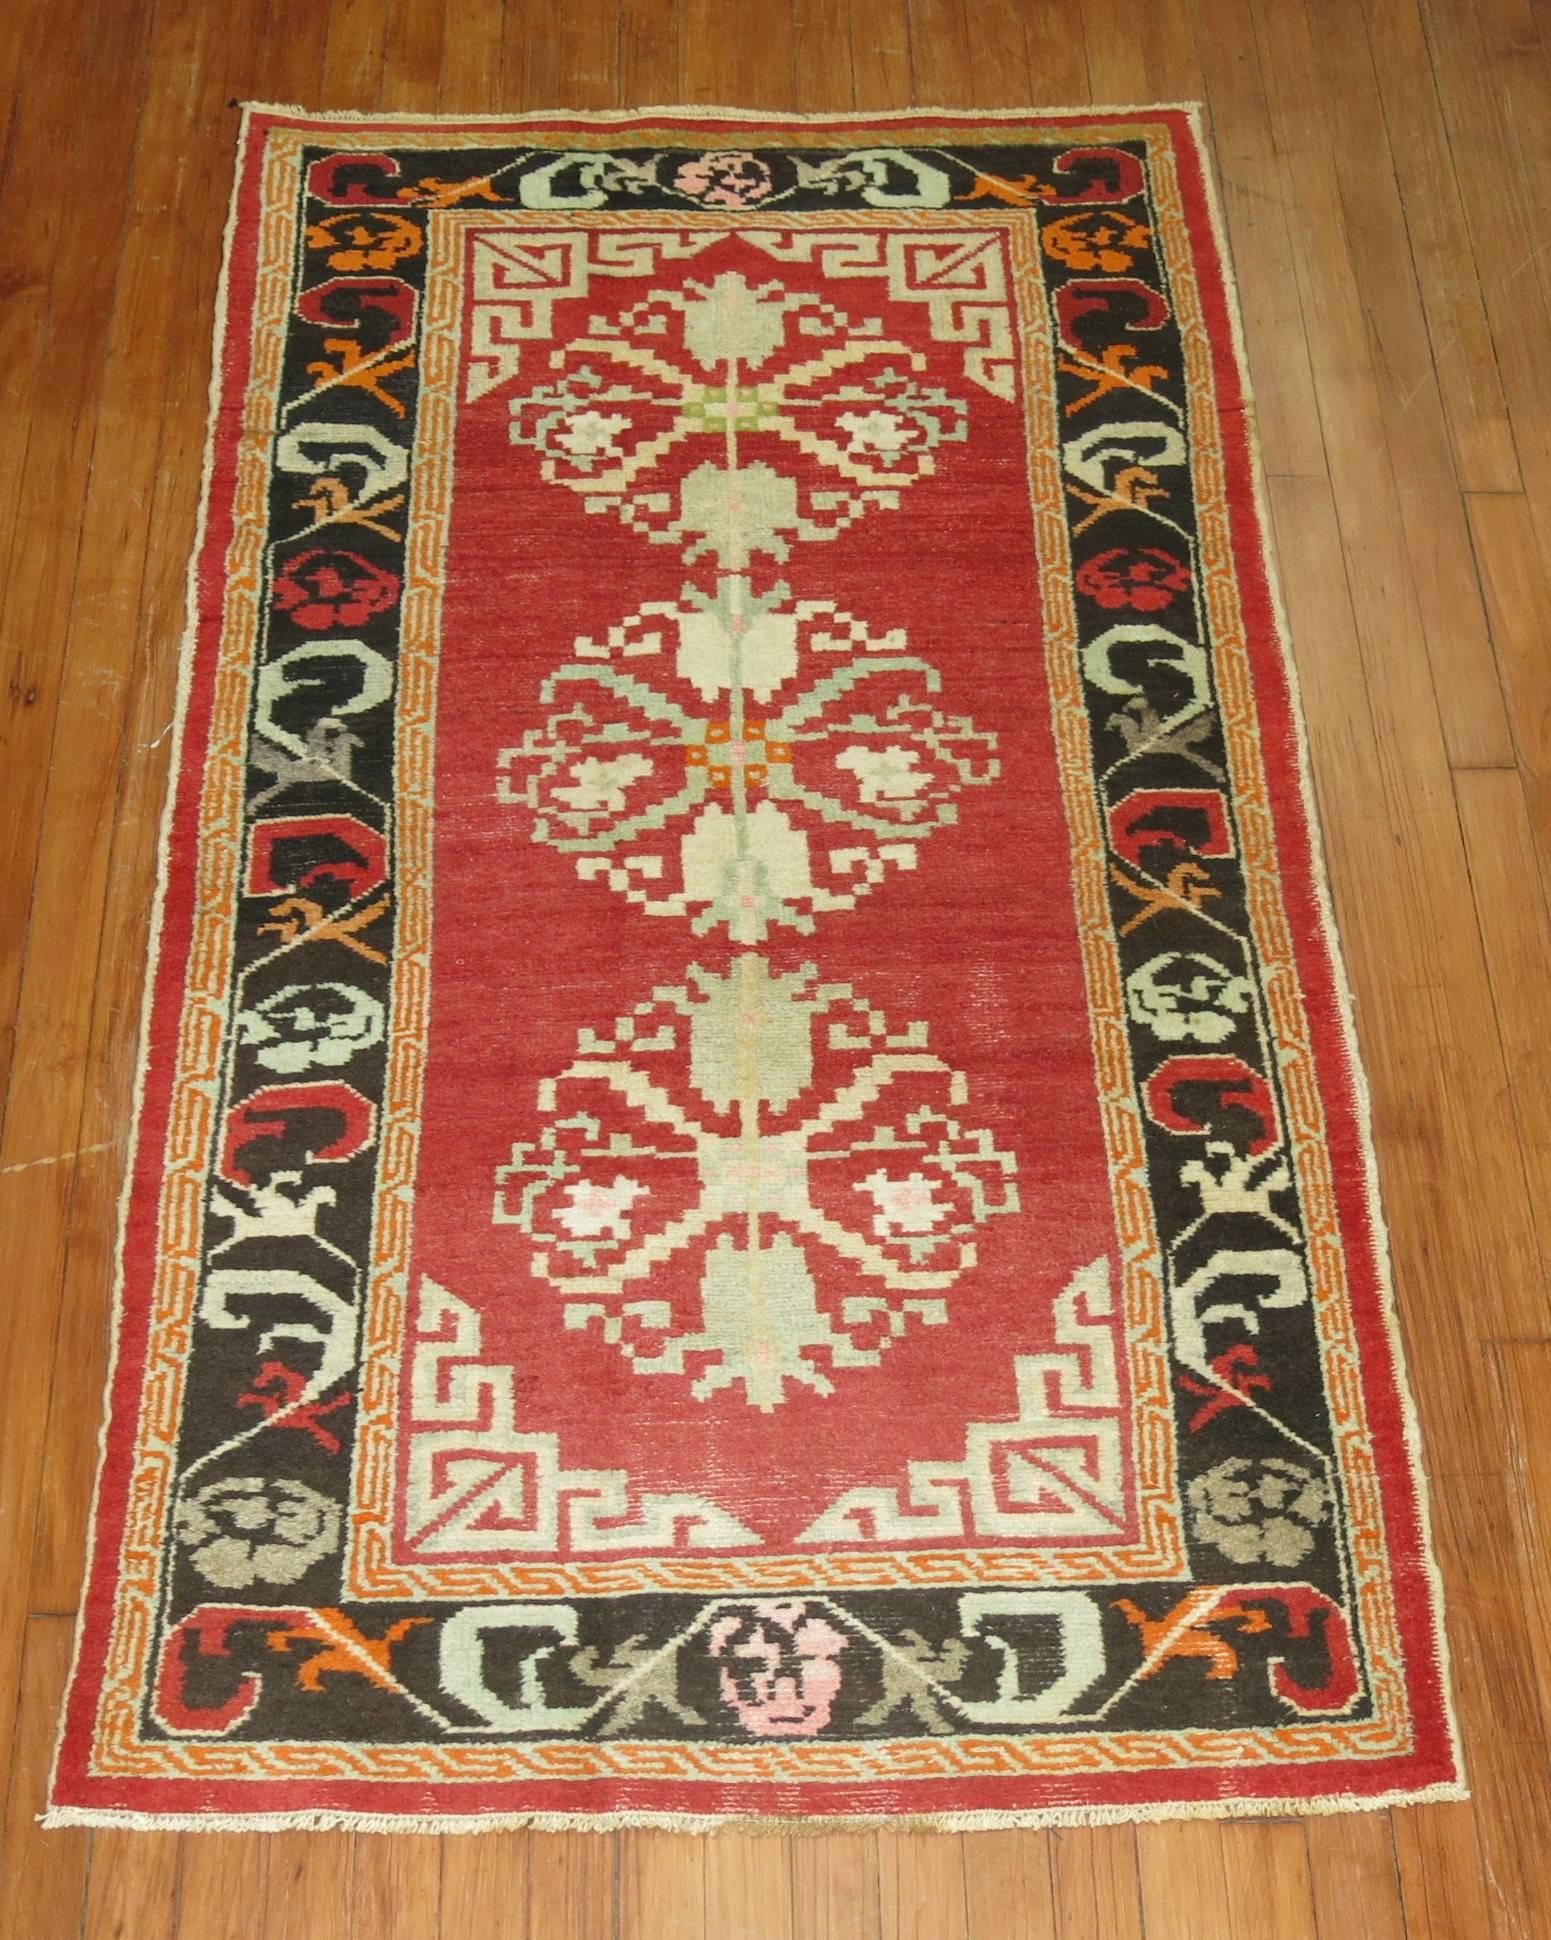 A vintage Turkish rug with some Mongolian design characteristics 